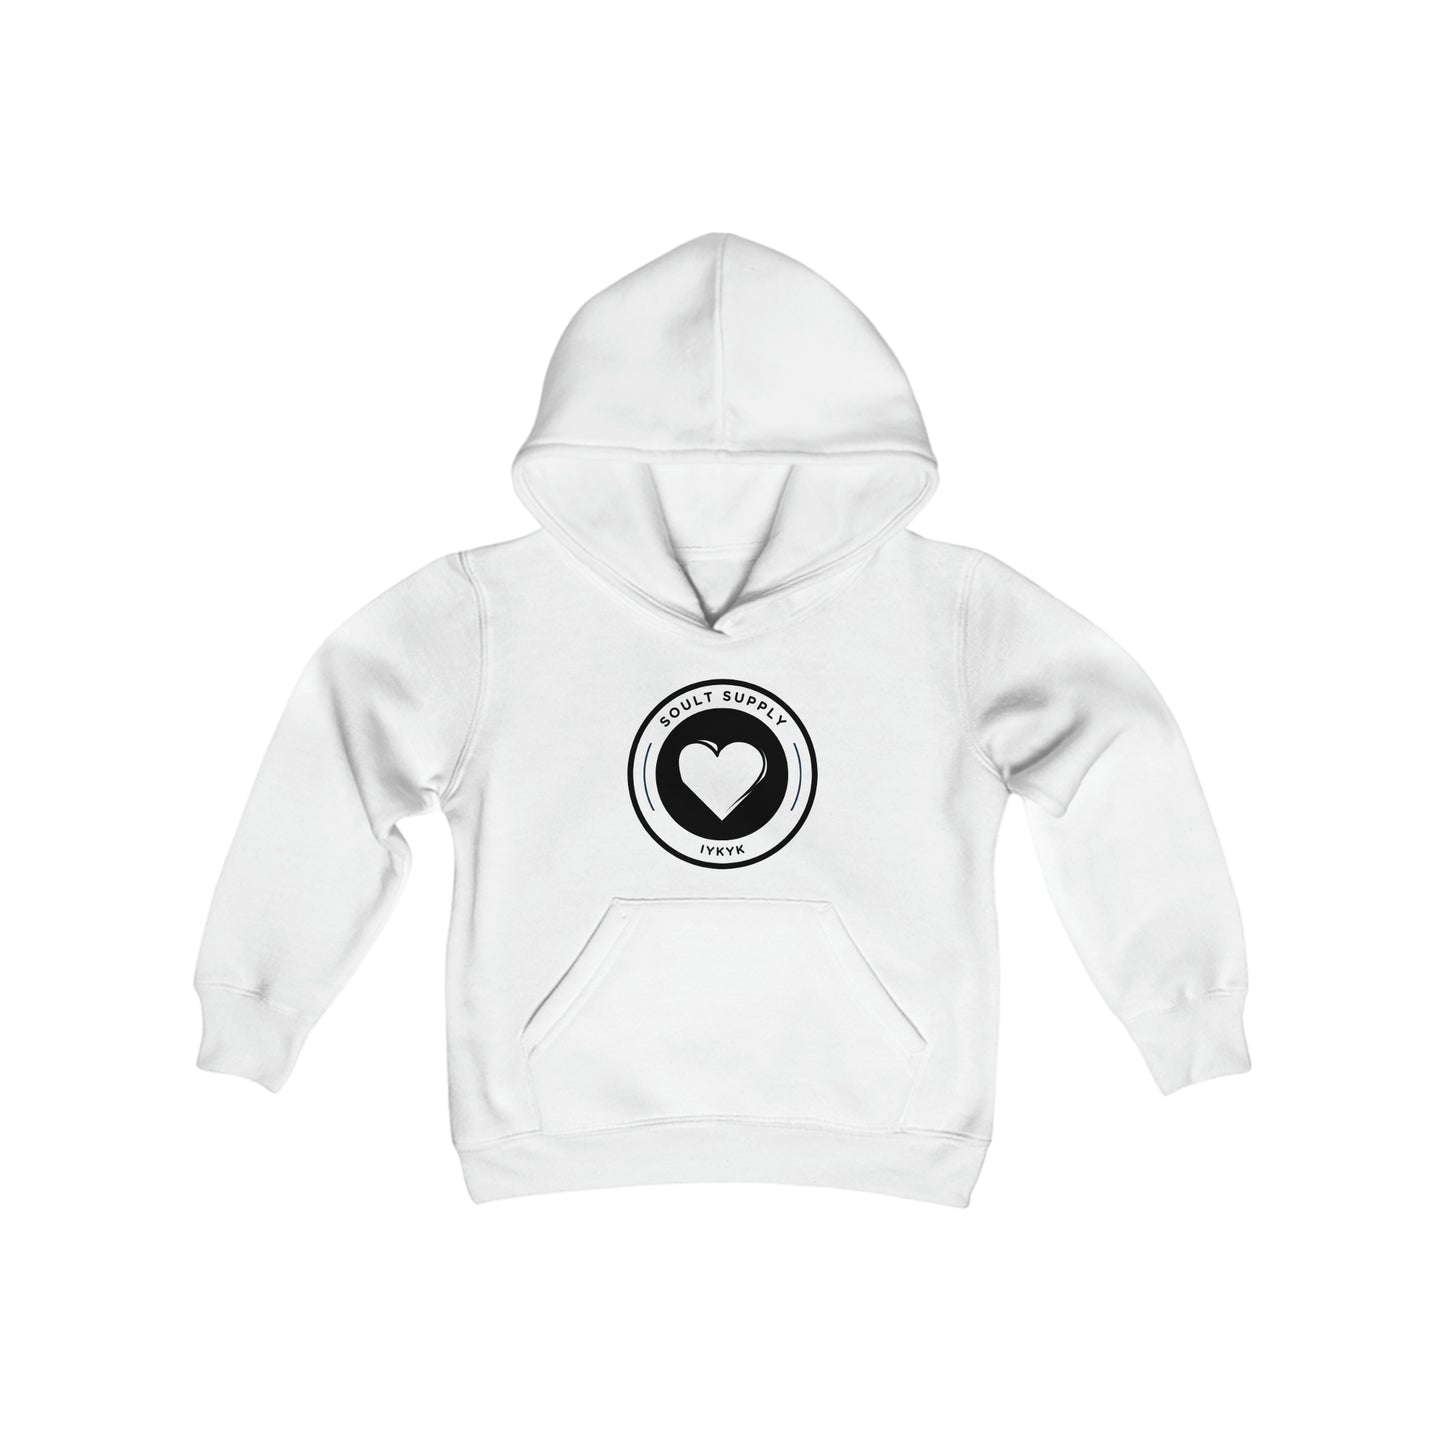 Soult Supply Youth Heavy Blend Hooded Sweatshirt